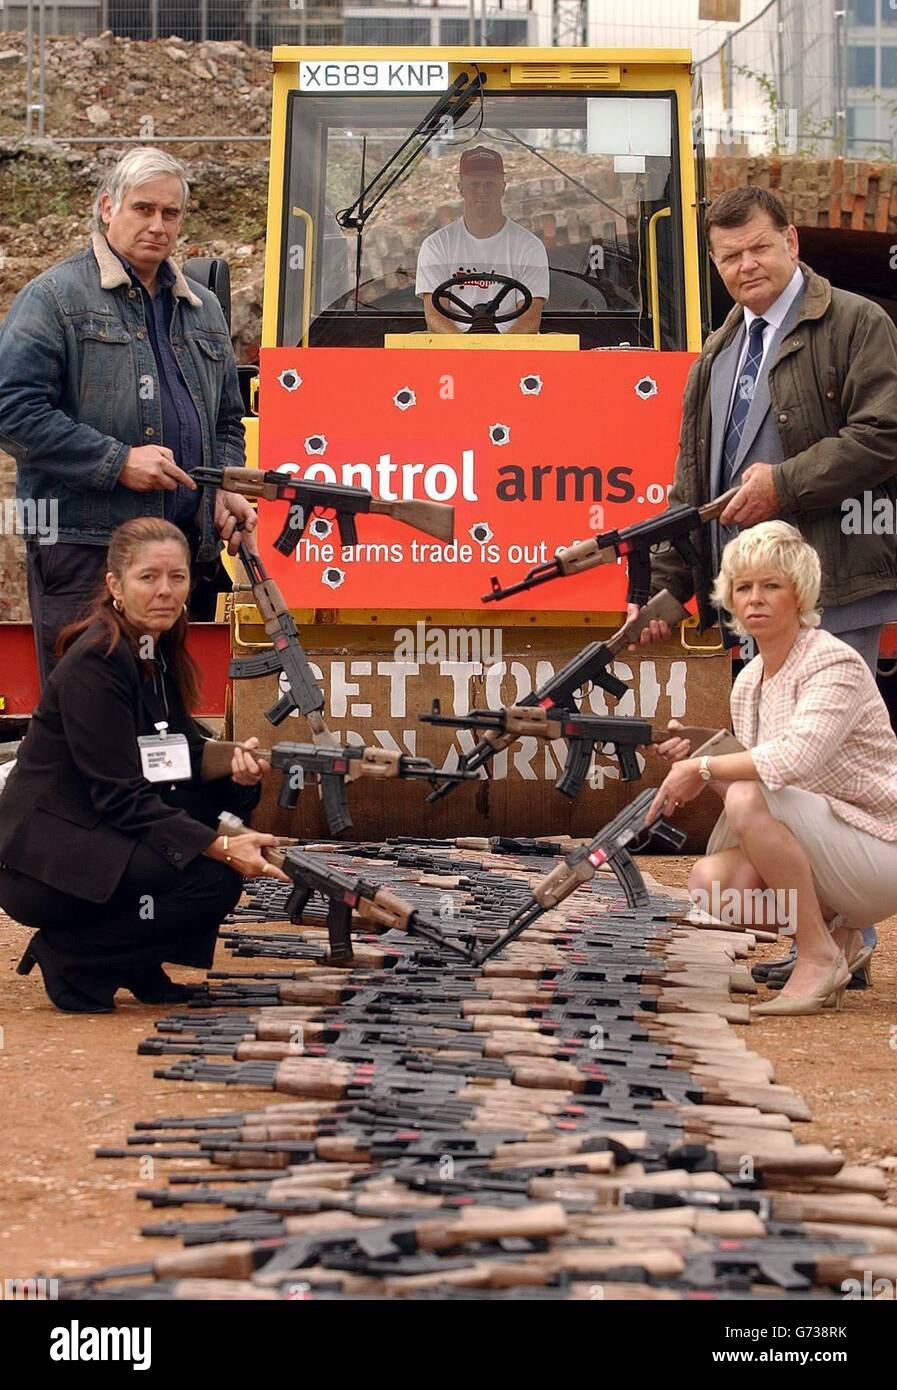 A group of four bereaved parents hold toy AK-47 machine guns, as a symbolic gesture before they are crushed in central London, to pressurise the Government to tighten controls on the arms trade. Mick North (top left) whose daughter Sophie aged 5 was killed in Dunblane in 1996, Lucy Cope (bottom left) whose son Damian aged 22 was shot dead in a London nightclub in 2002, Steve Walker (top right) whose son Andrew was shot over a disputed flat in 2001, and Jane Atkinson, whose son George aged 13 was killed by an air gun in 1999. Stock Photo